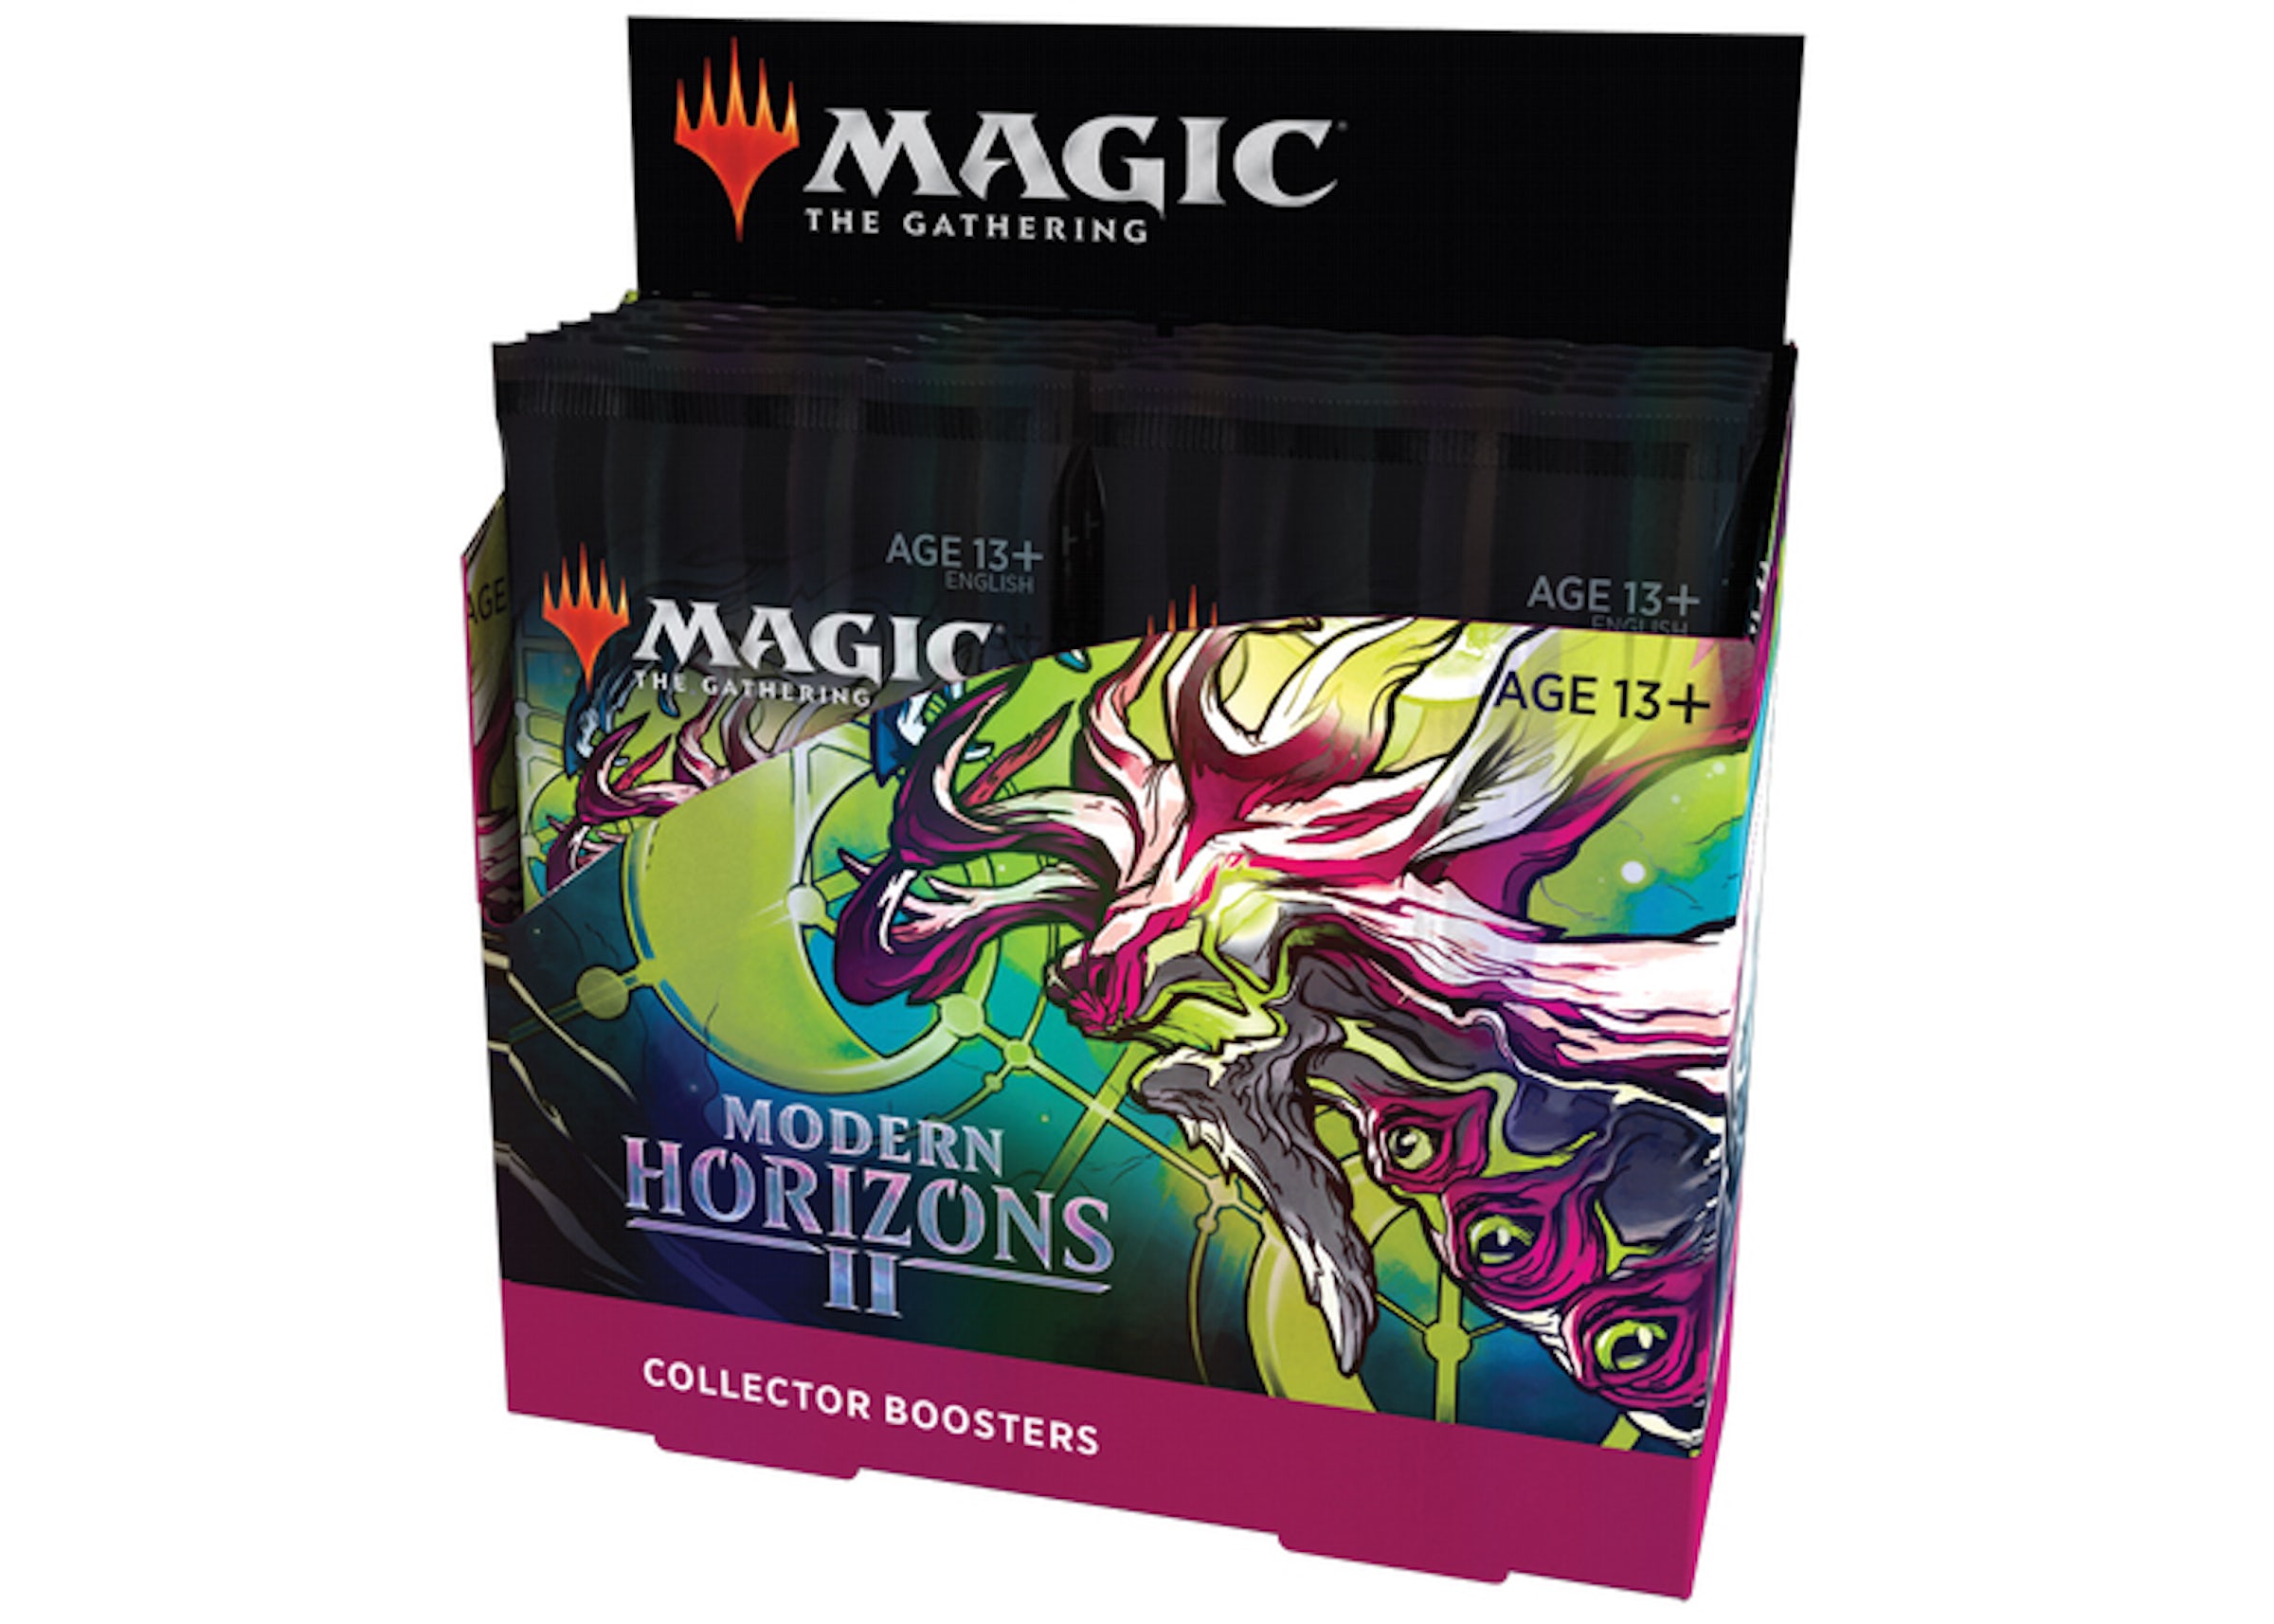 Magic: The Gathering TCG Modern Horizons 2 Collector Booster Box - IT